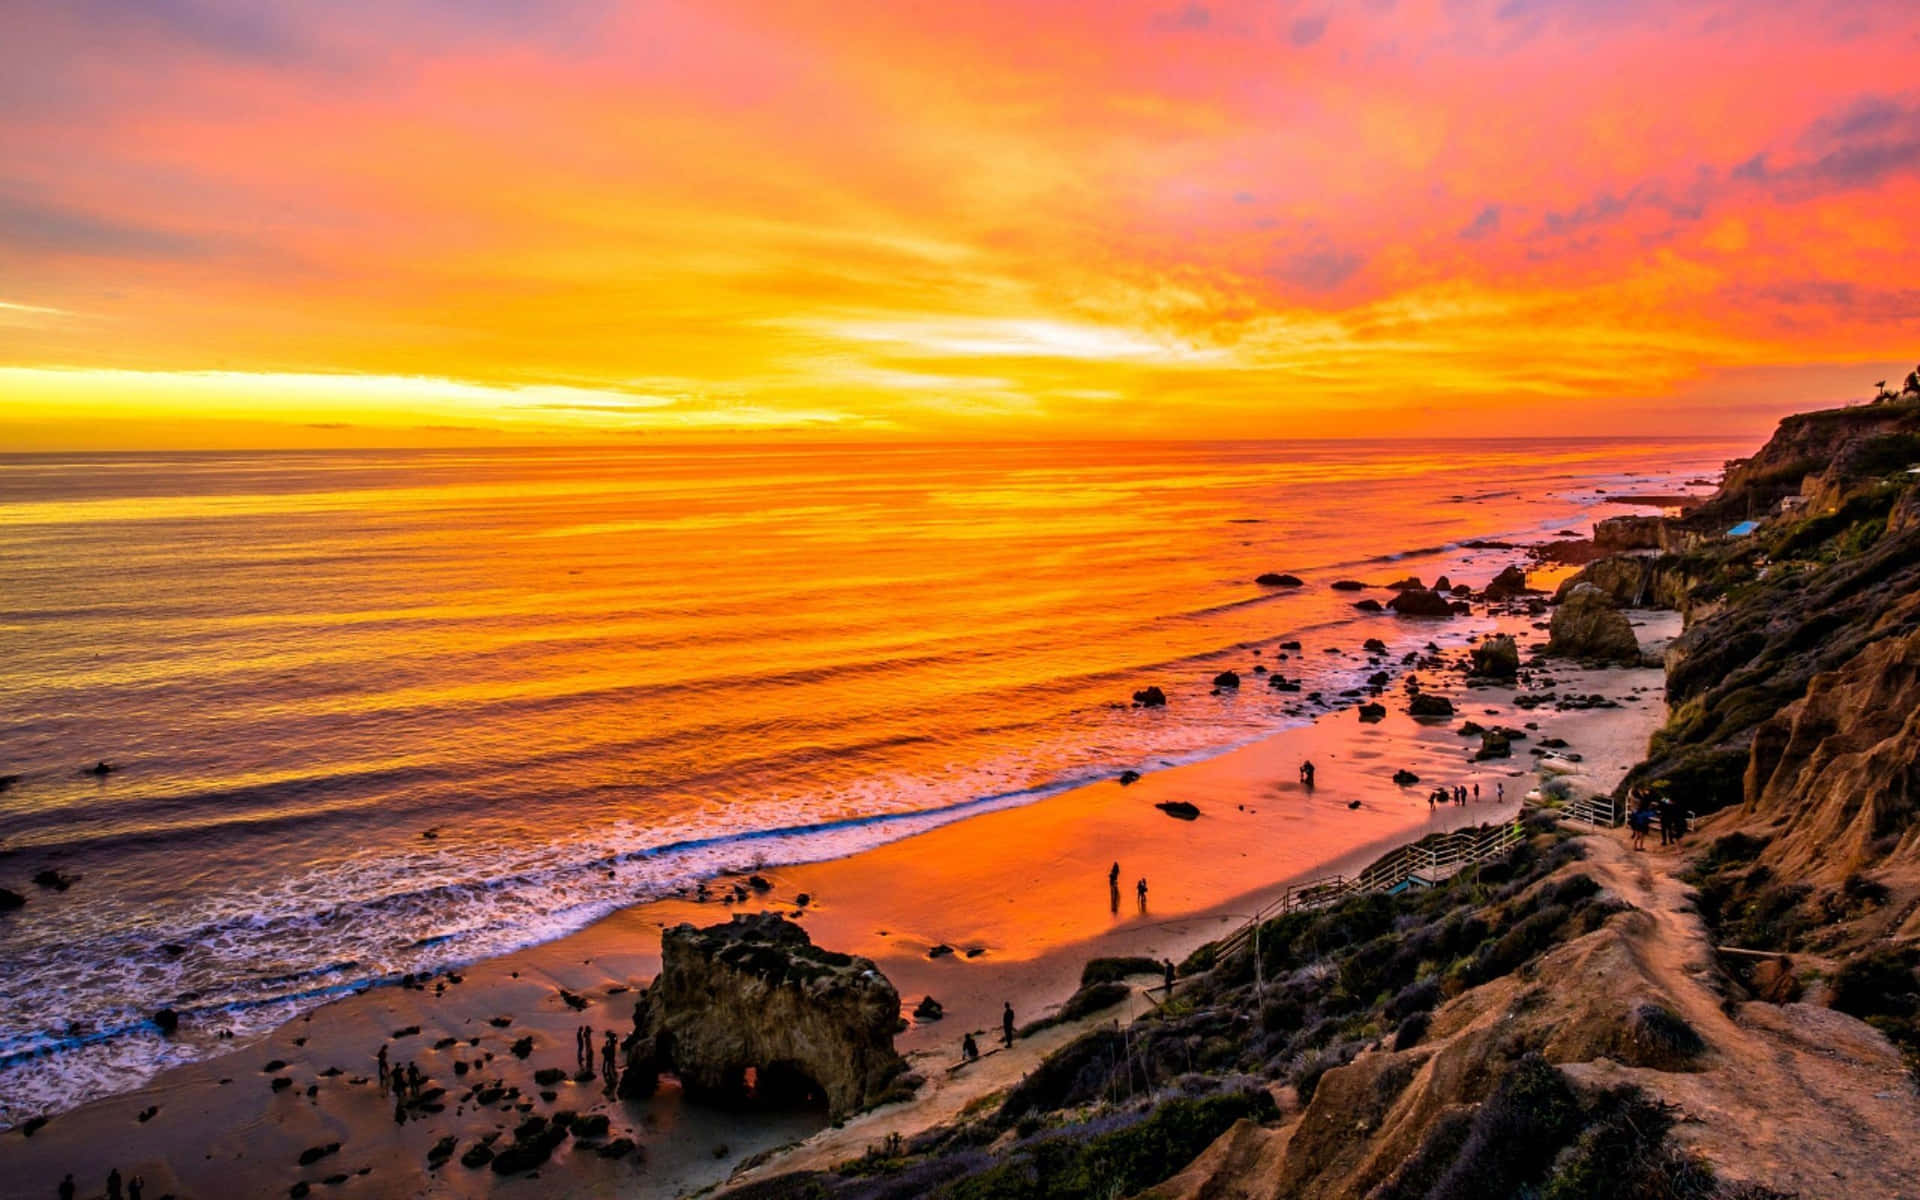 A Sunset Over A Beach With People On The Cliffs Wallpaper